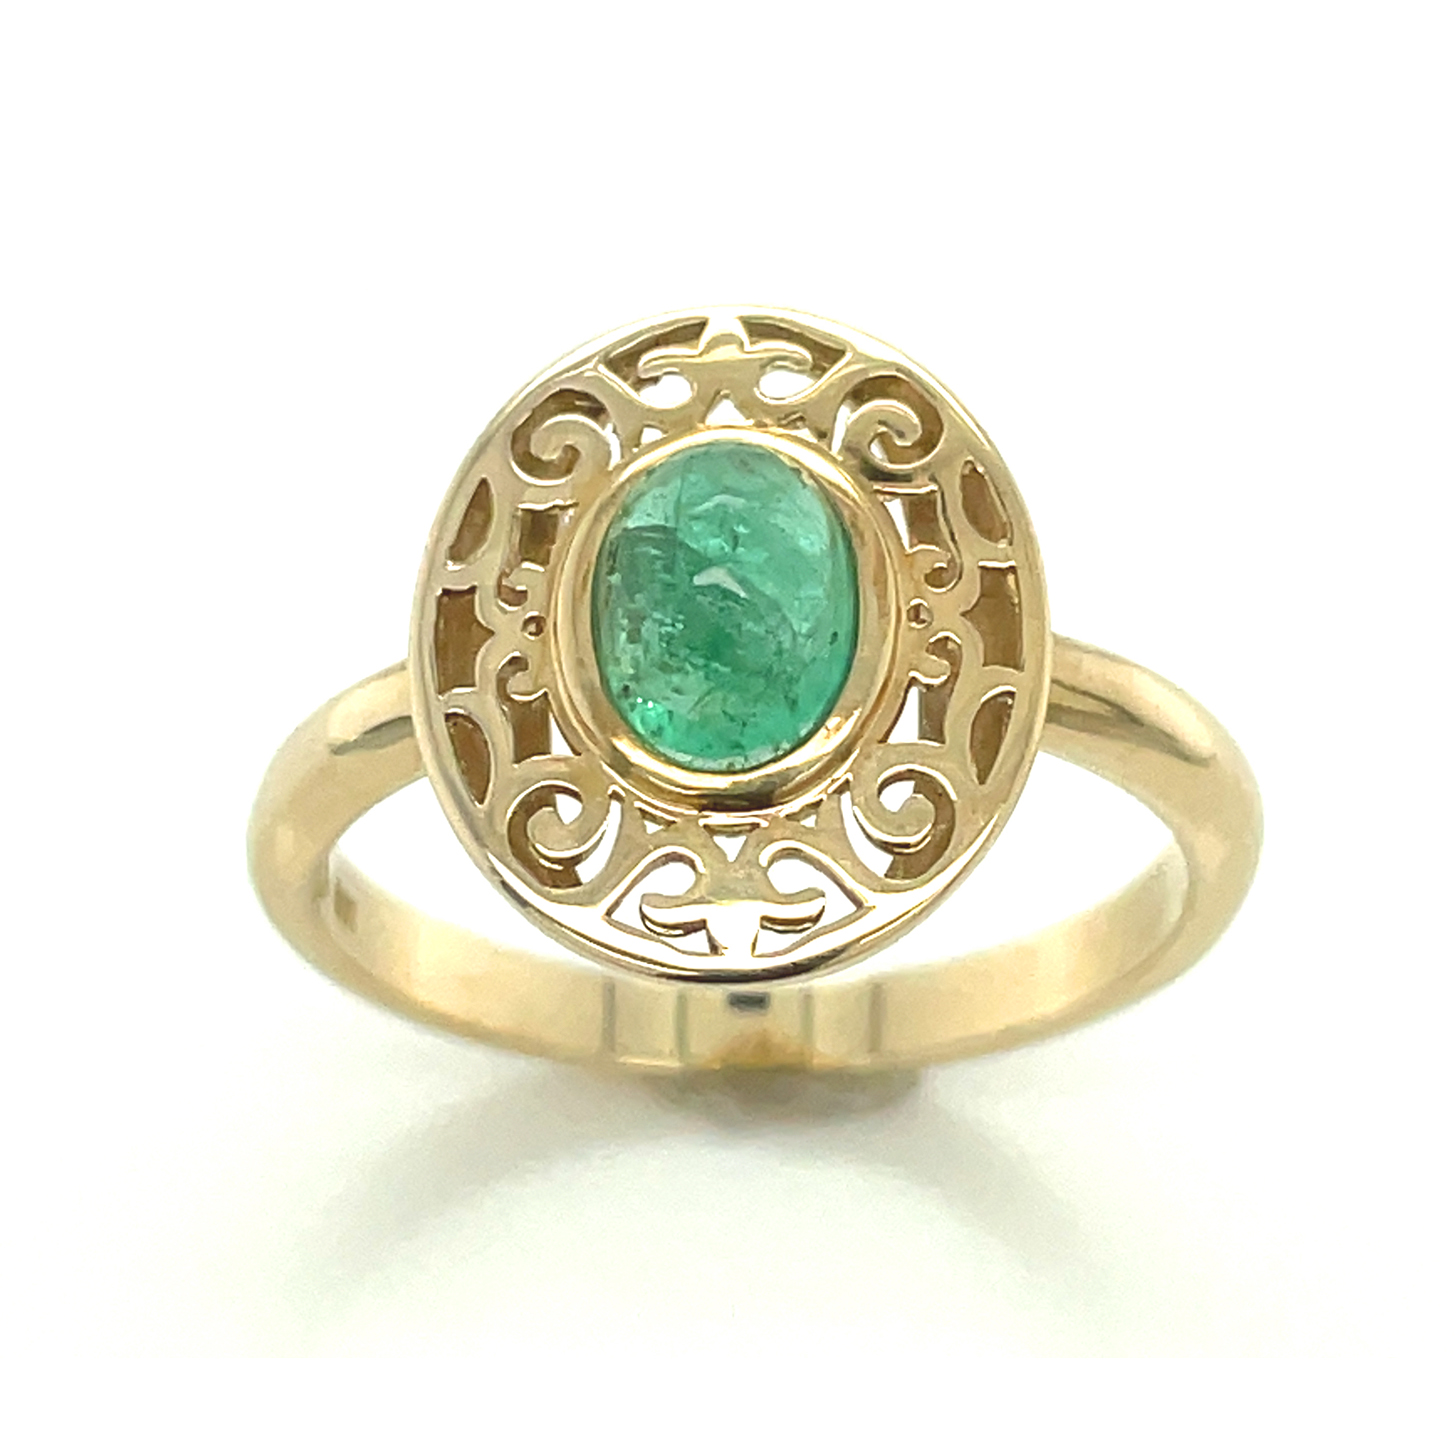 Smaragd, grün, oval Cabochon, ca. 0,610 ct. Edelstein Ring Gelbgold 375/000 Sogni d´oro Classic